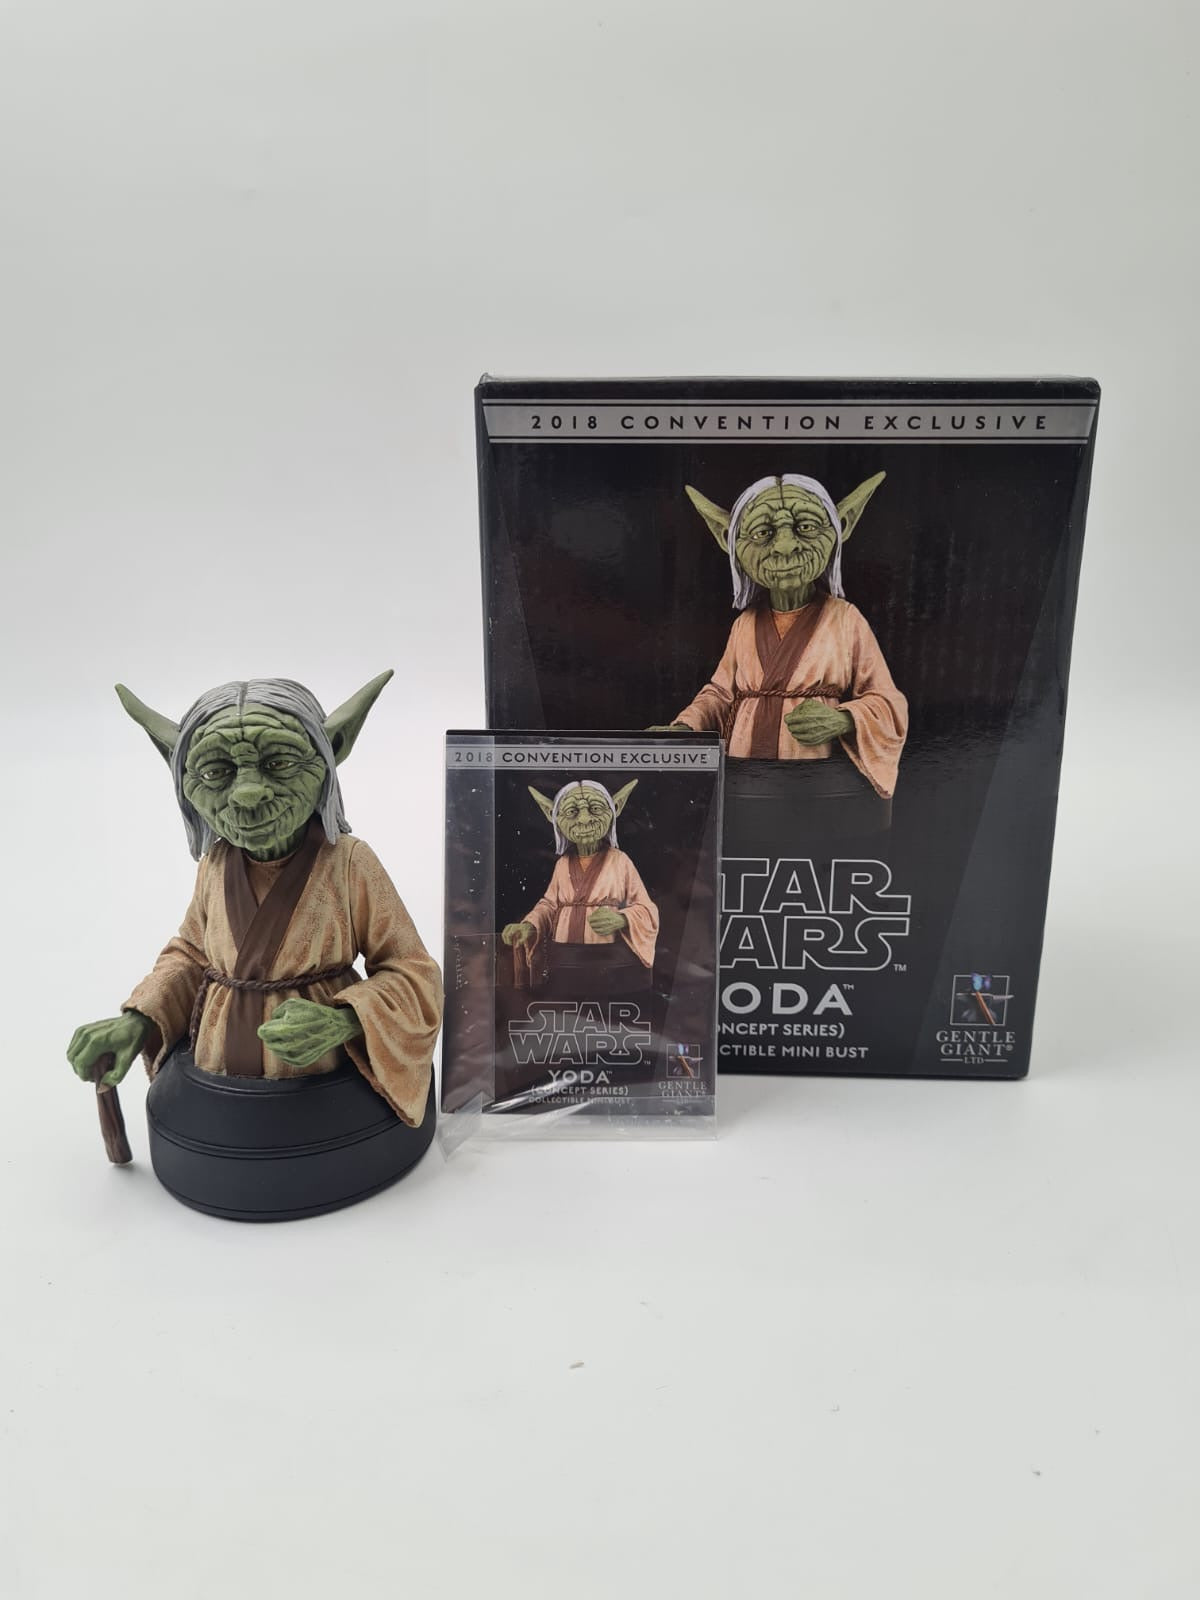 YODA (CONCEPT SERIES) COLLECTIBLE MINI BUST 2018 CONVENTION EXCLUSIVE GENTLE GIANT